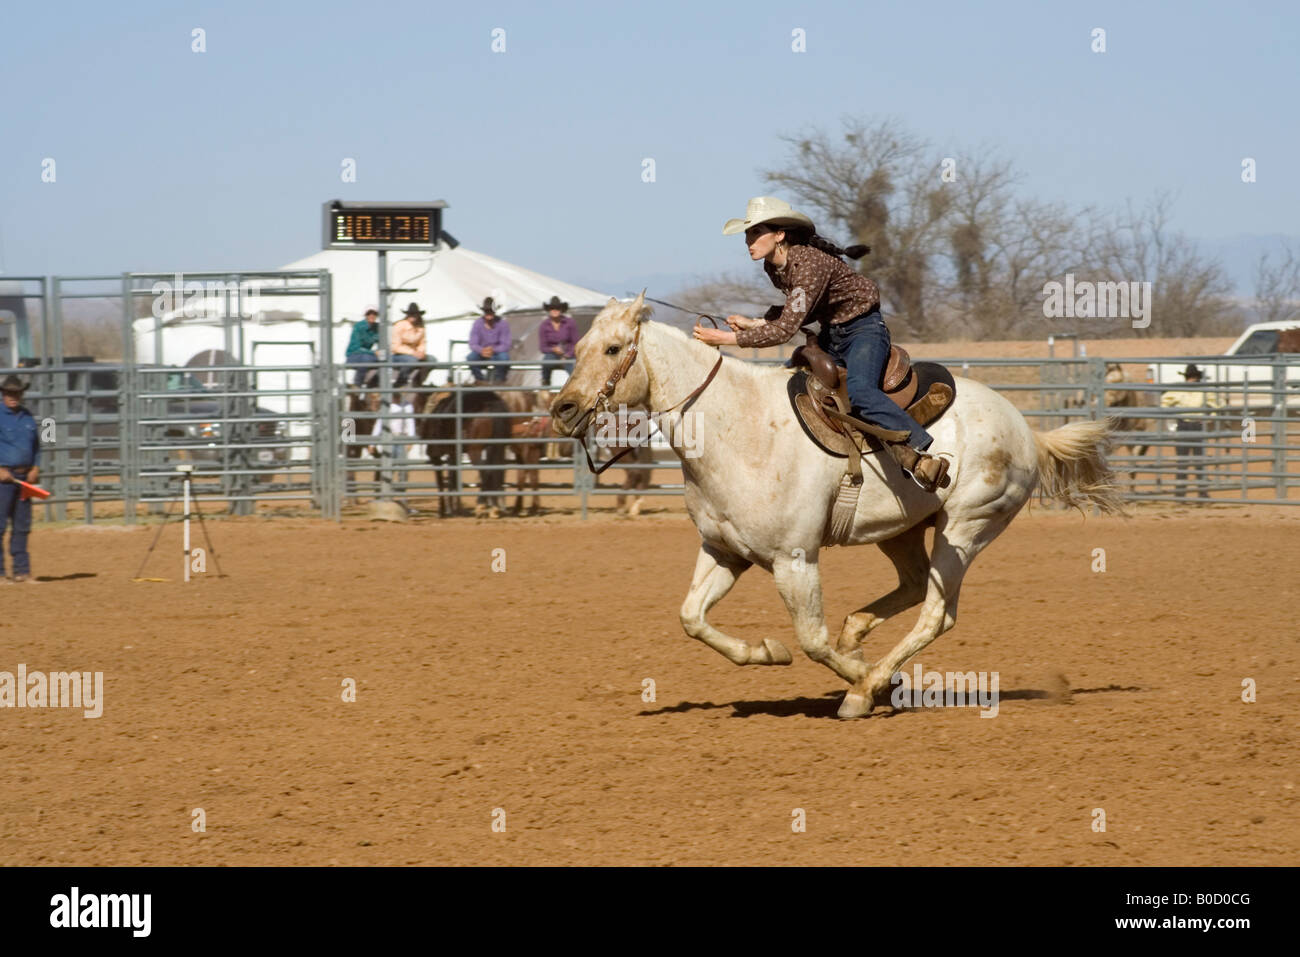 Young Cowgirl Racing From Barrel To Barrel At Rodeo Hair Flying Stock Photo  - Download Image Now - iStock